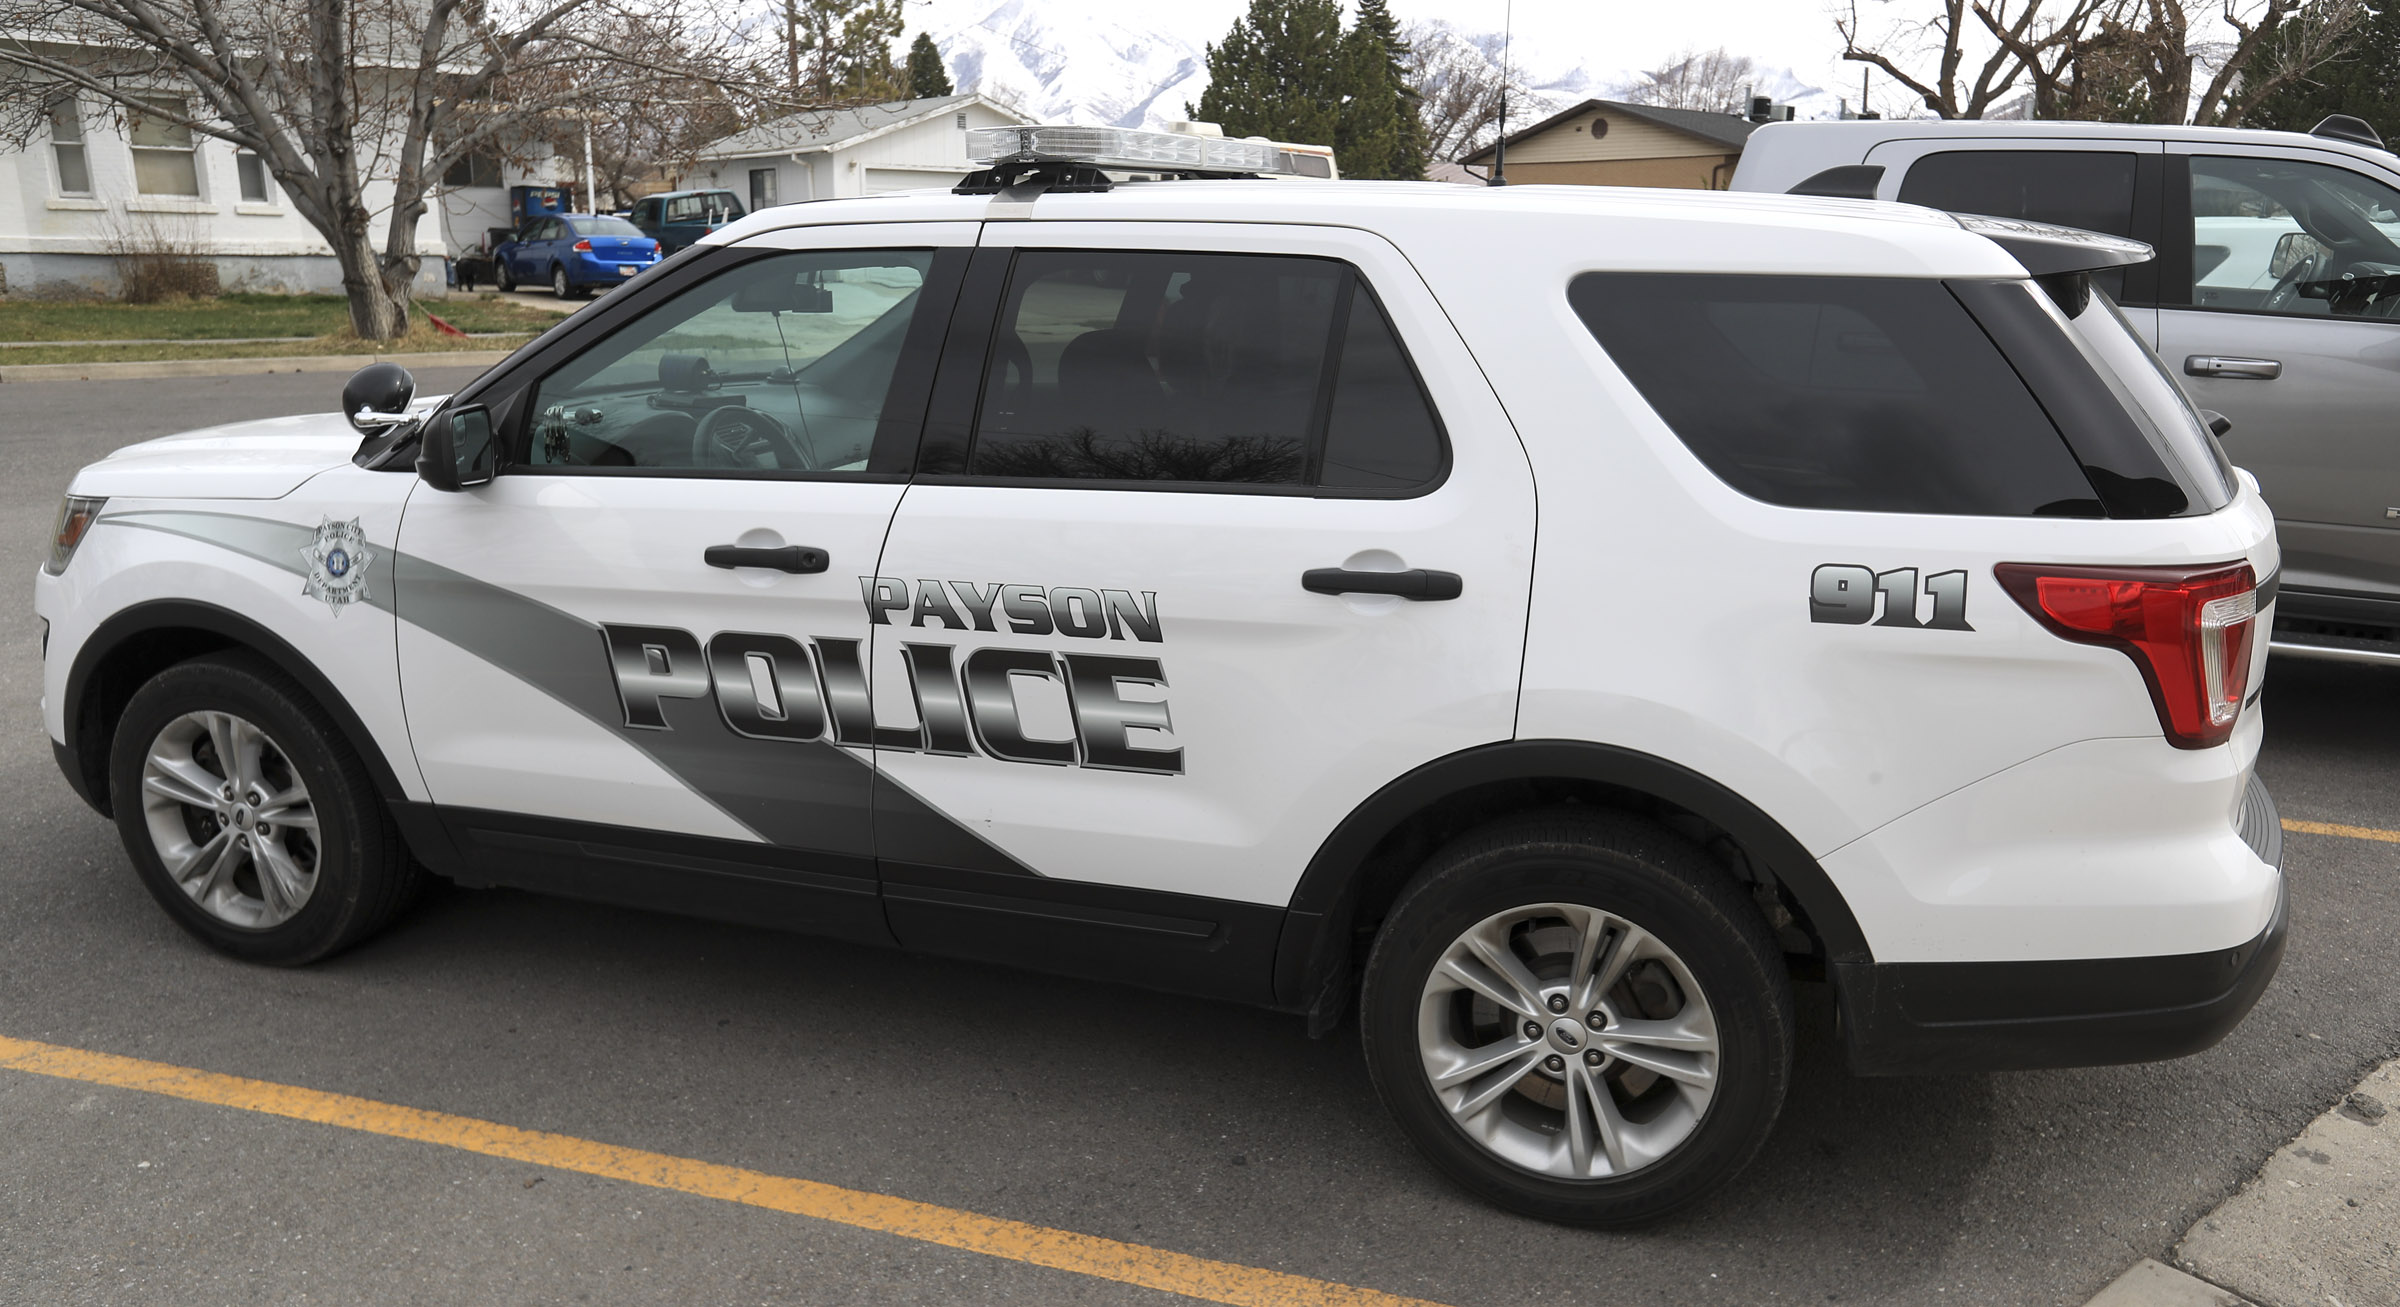   
																One person arrested, another hospitalized following shooting in Payson 
															 